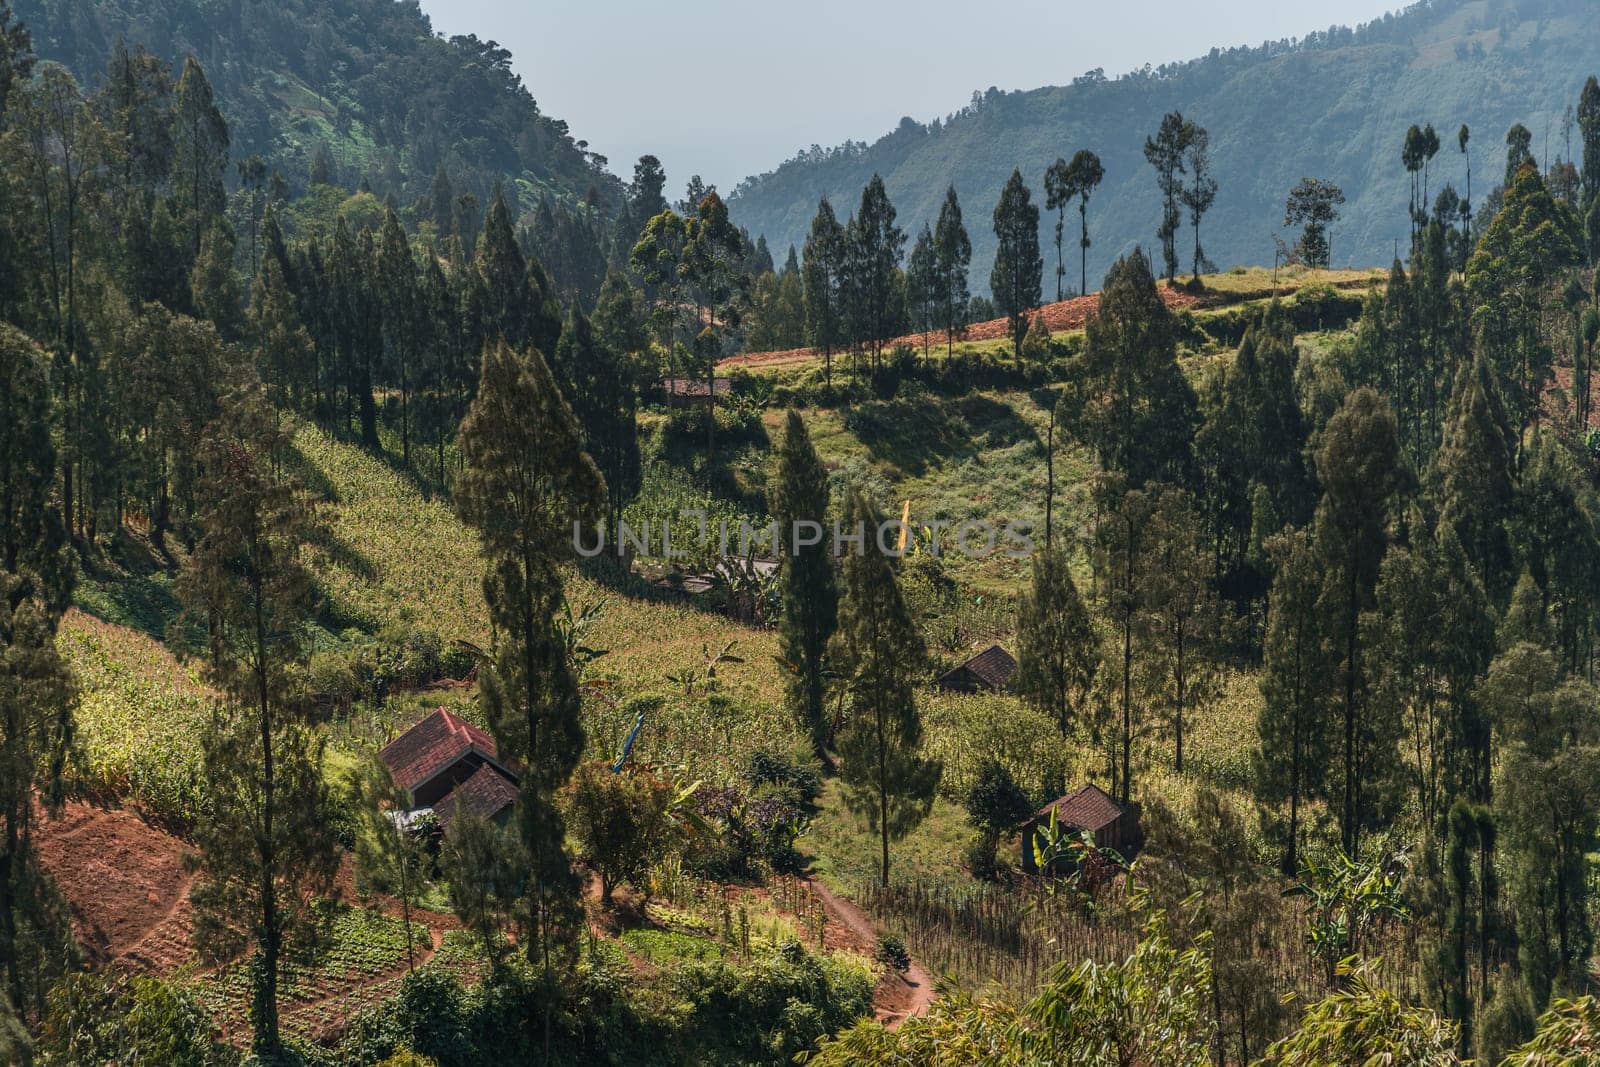 Landscape view of balinese garden and forest vegetation. Tropical hills trees and rice plantation